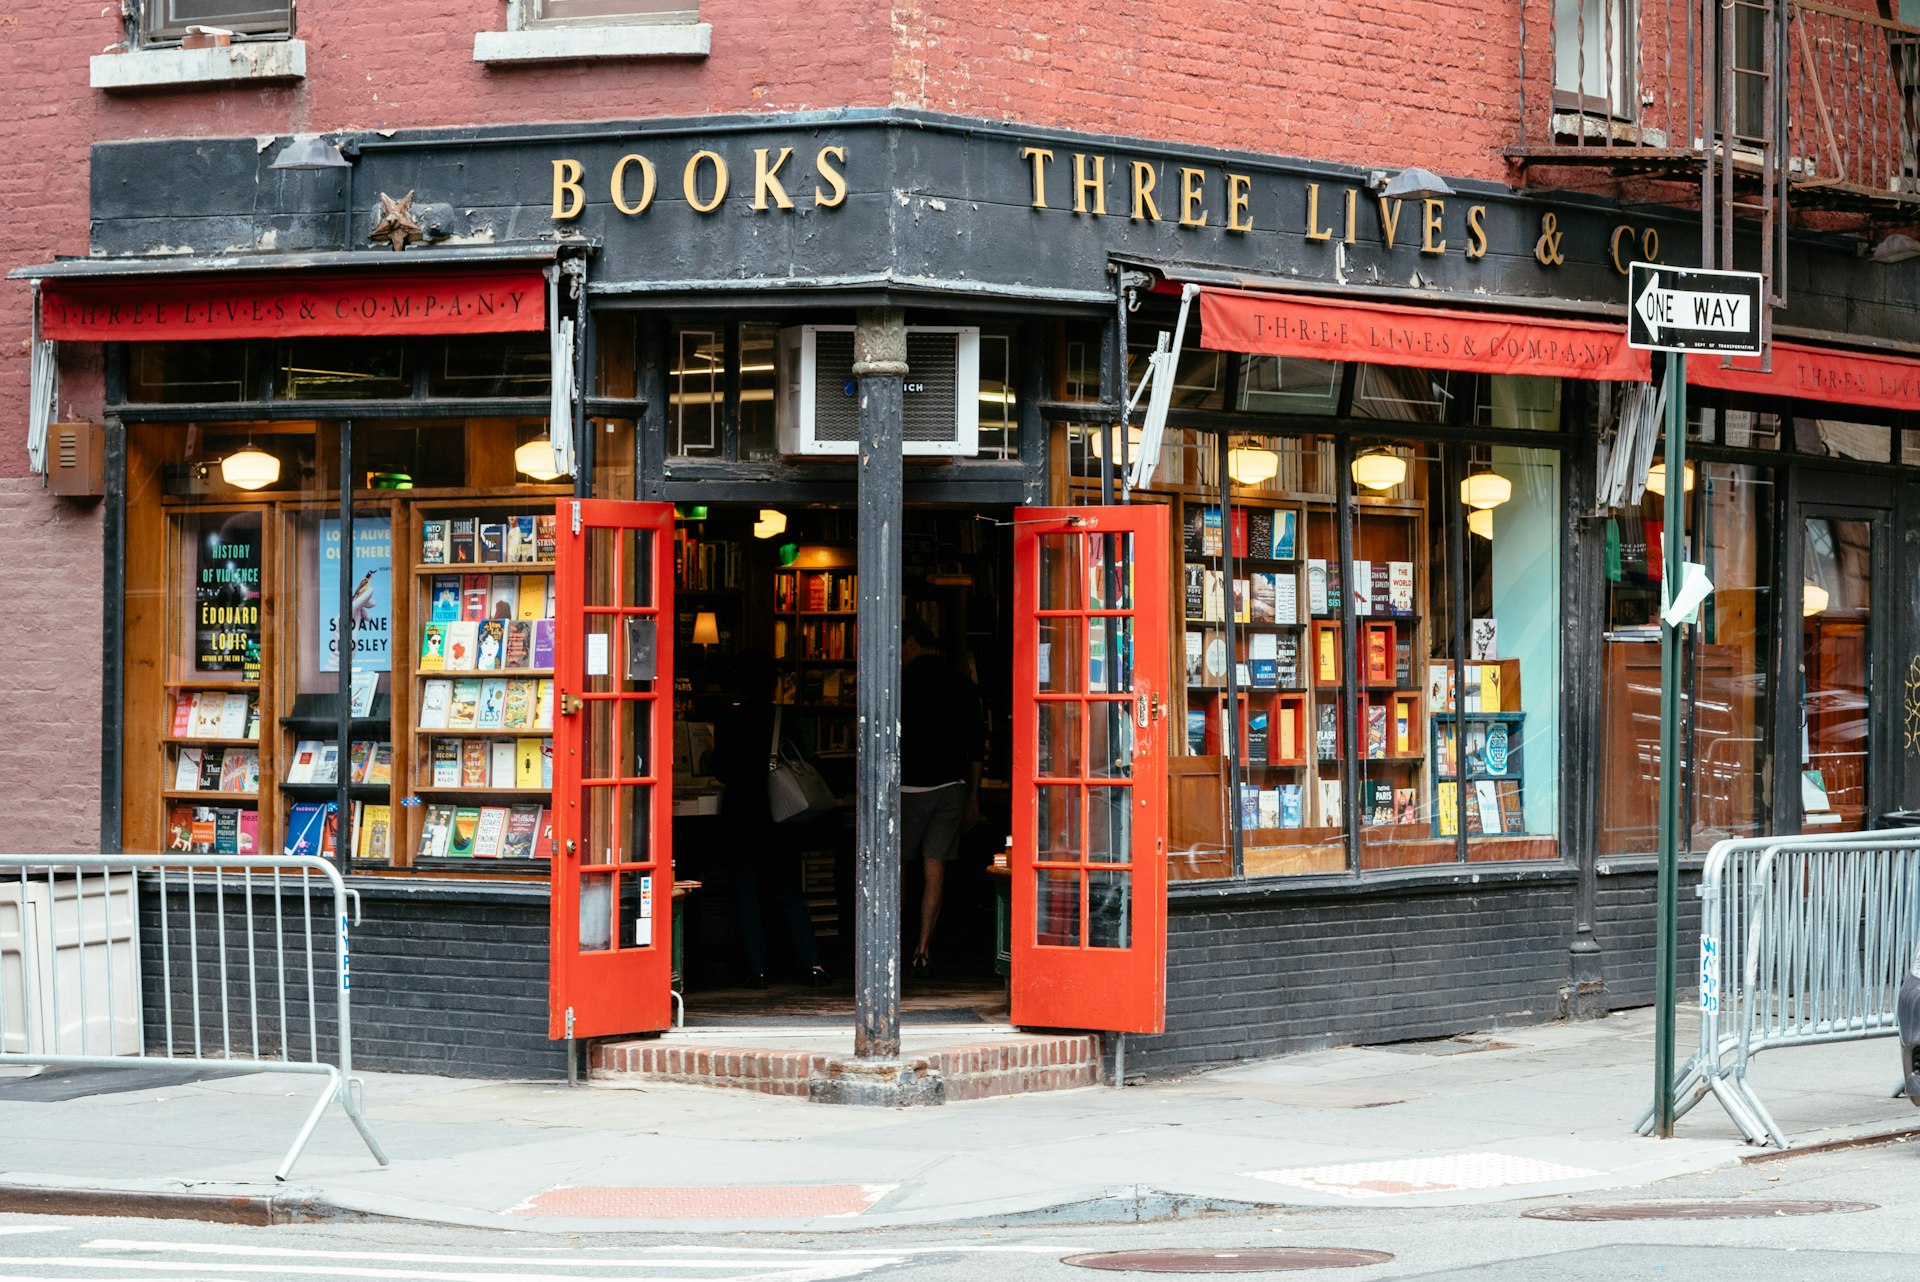 Three Lives and Co bookstore in Greenwich Village, New York City